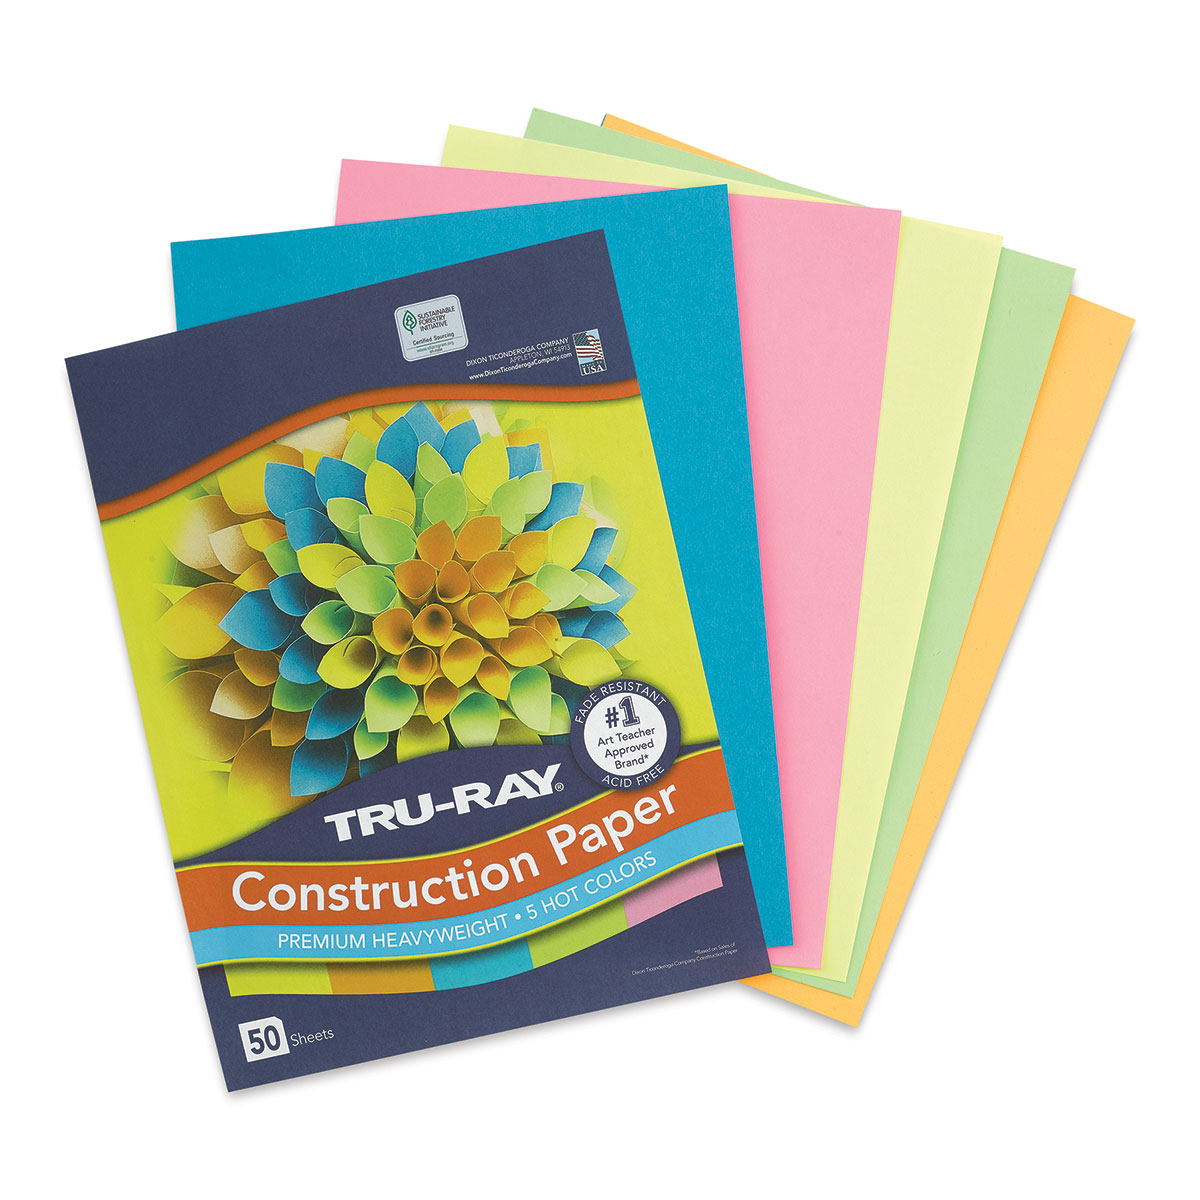 Pacon Tru-Ray Construction Paper - 12 x 18, Almond, 50 Sheets